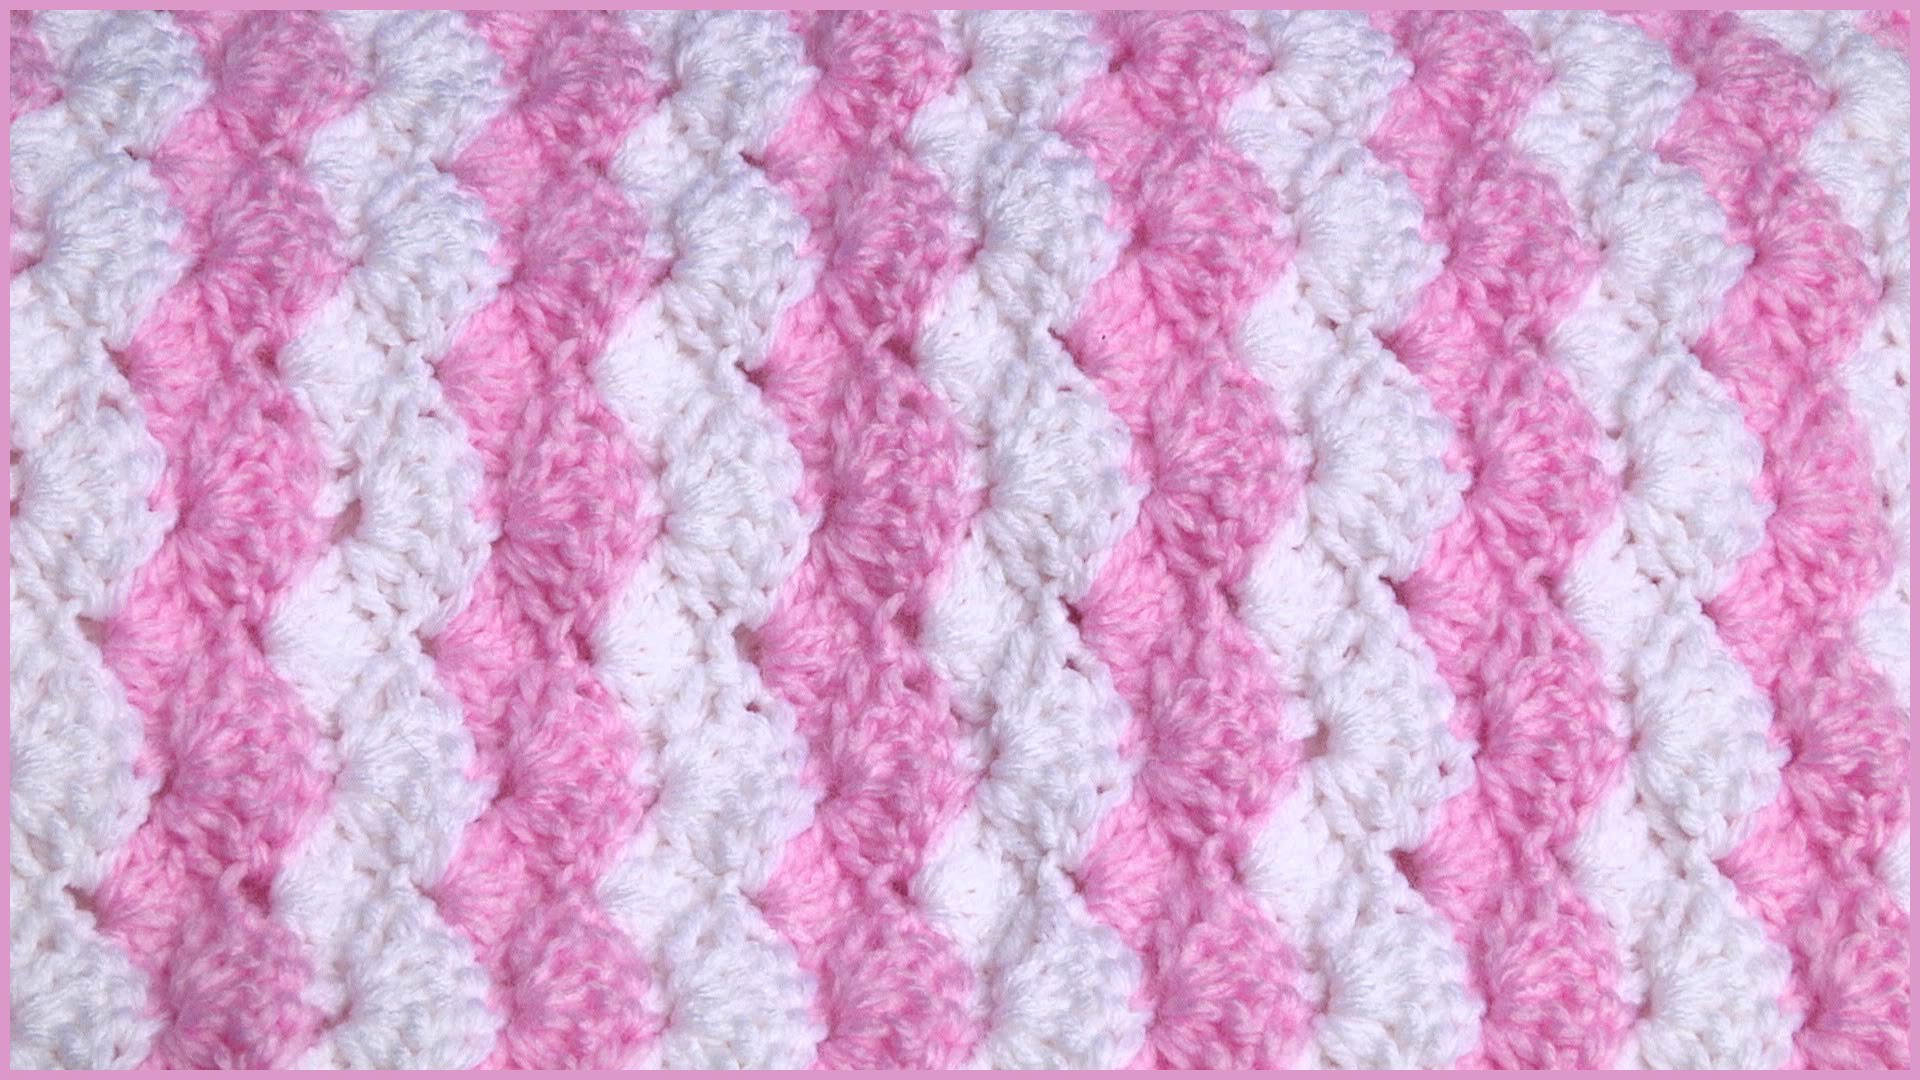 Crochet Baby Afghan Patterns Video Tutorial Learn How To Make A Wavy Ba Blanket Using The